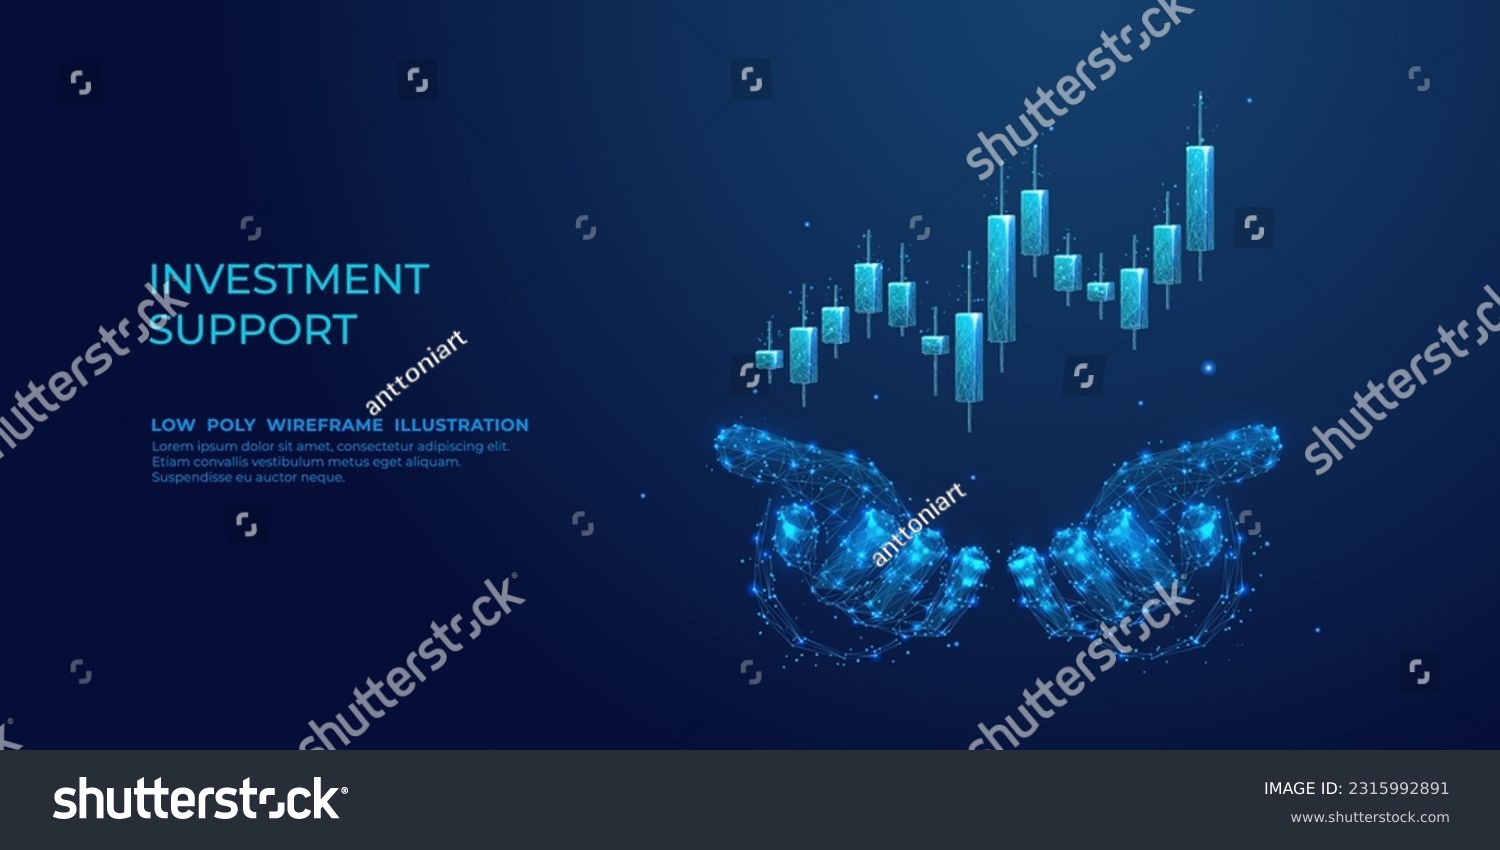 SVG of Digital abstract human hands holding 3D stock market candlestick graph chart. The conception of investment support or financial literacy help. Low polygonal vector illustration on dark blue background svg